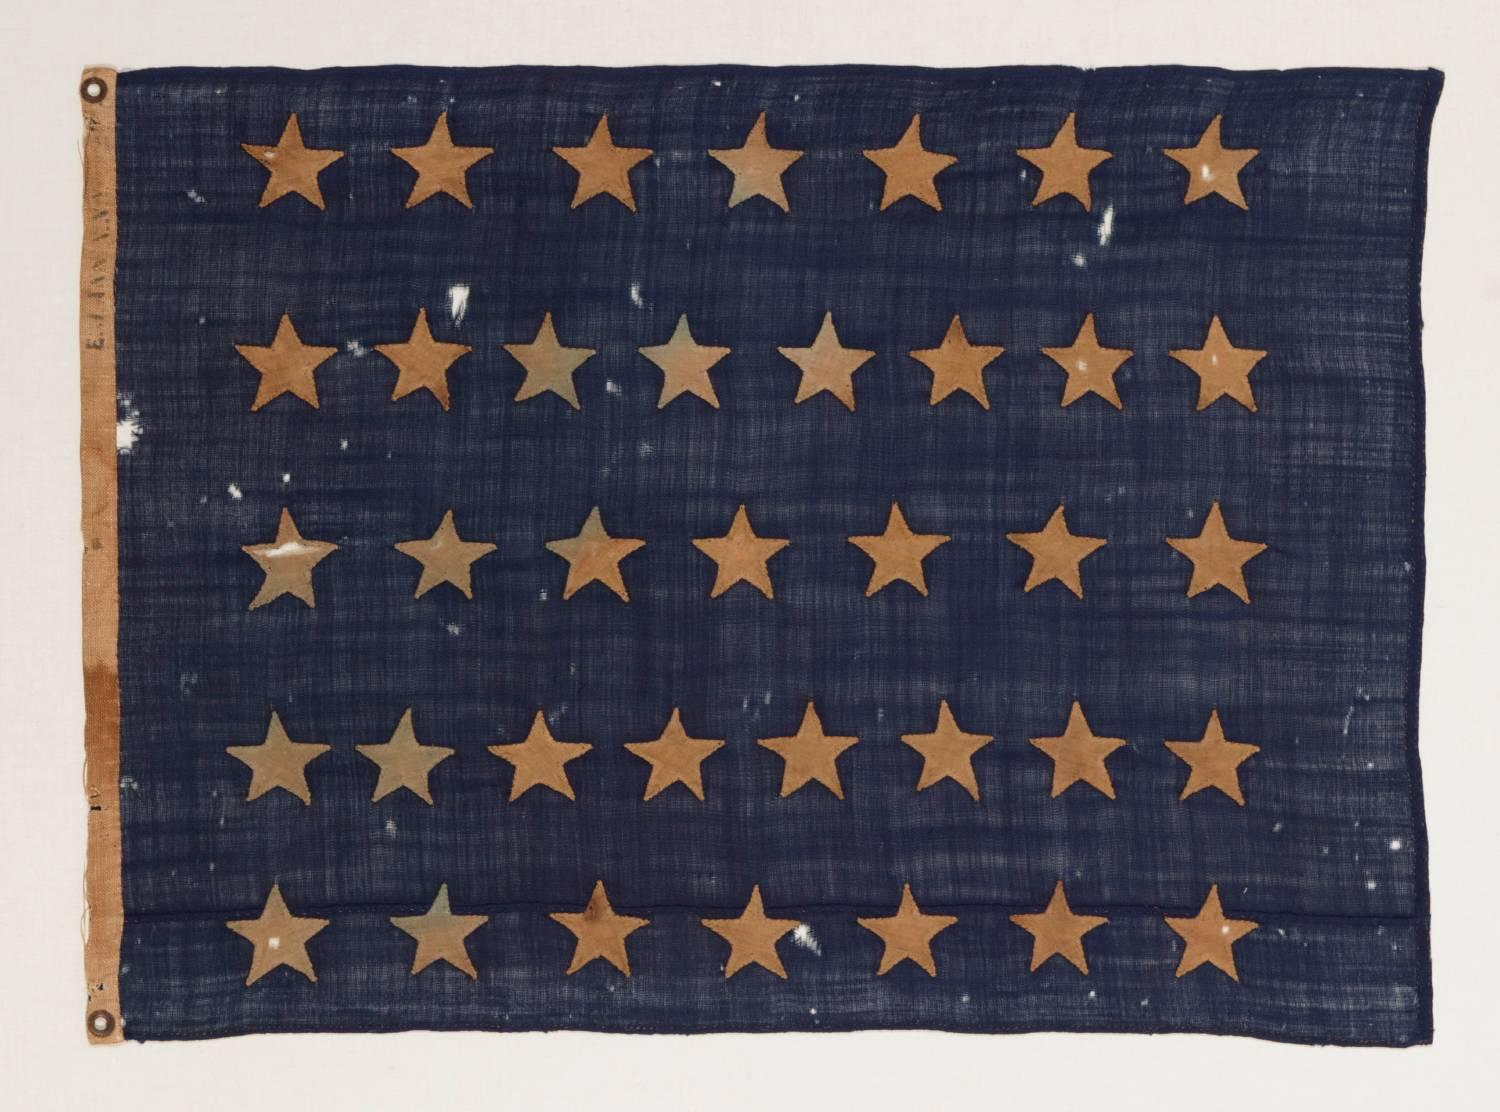 U.S. NAVY JACK WITH 37 STARS, AN ENTIRELY HAND-SEWN EXAMPLE WITH SINGLE-APPLIQUÉD STARS, MADE BY ANNIN IN NEW YORK CITY BETWEEN 1867 AND 1876, RECONSTRUCTION ERA, NEBRASKA STATEHOOD:

 Like the British Royal Navy, American vessels flew three